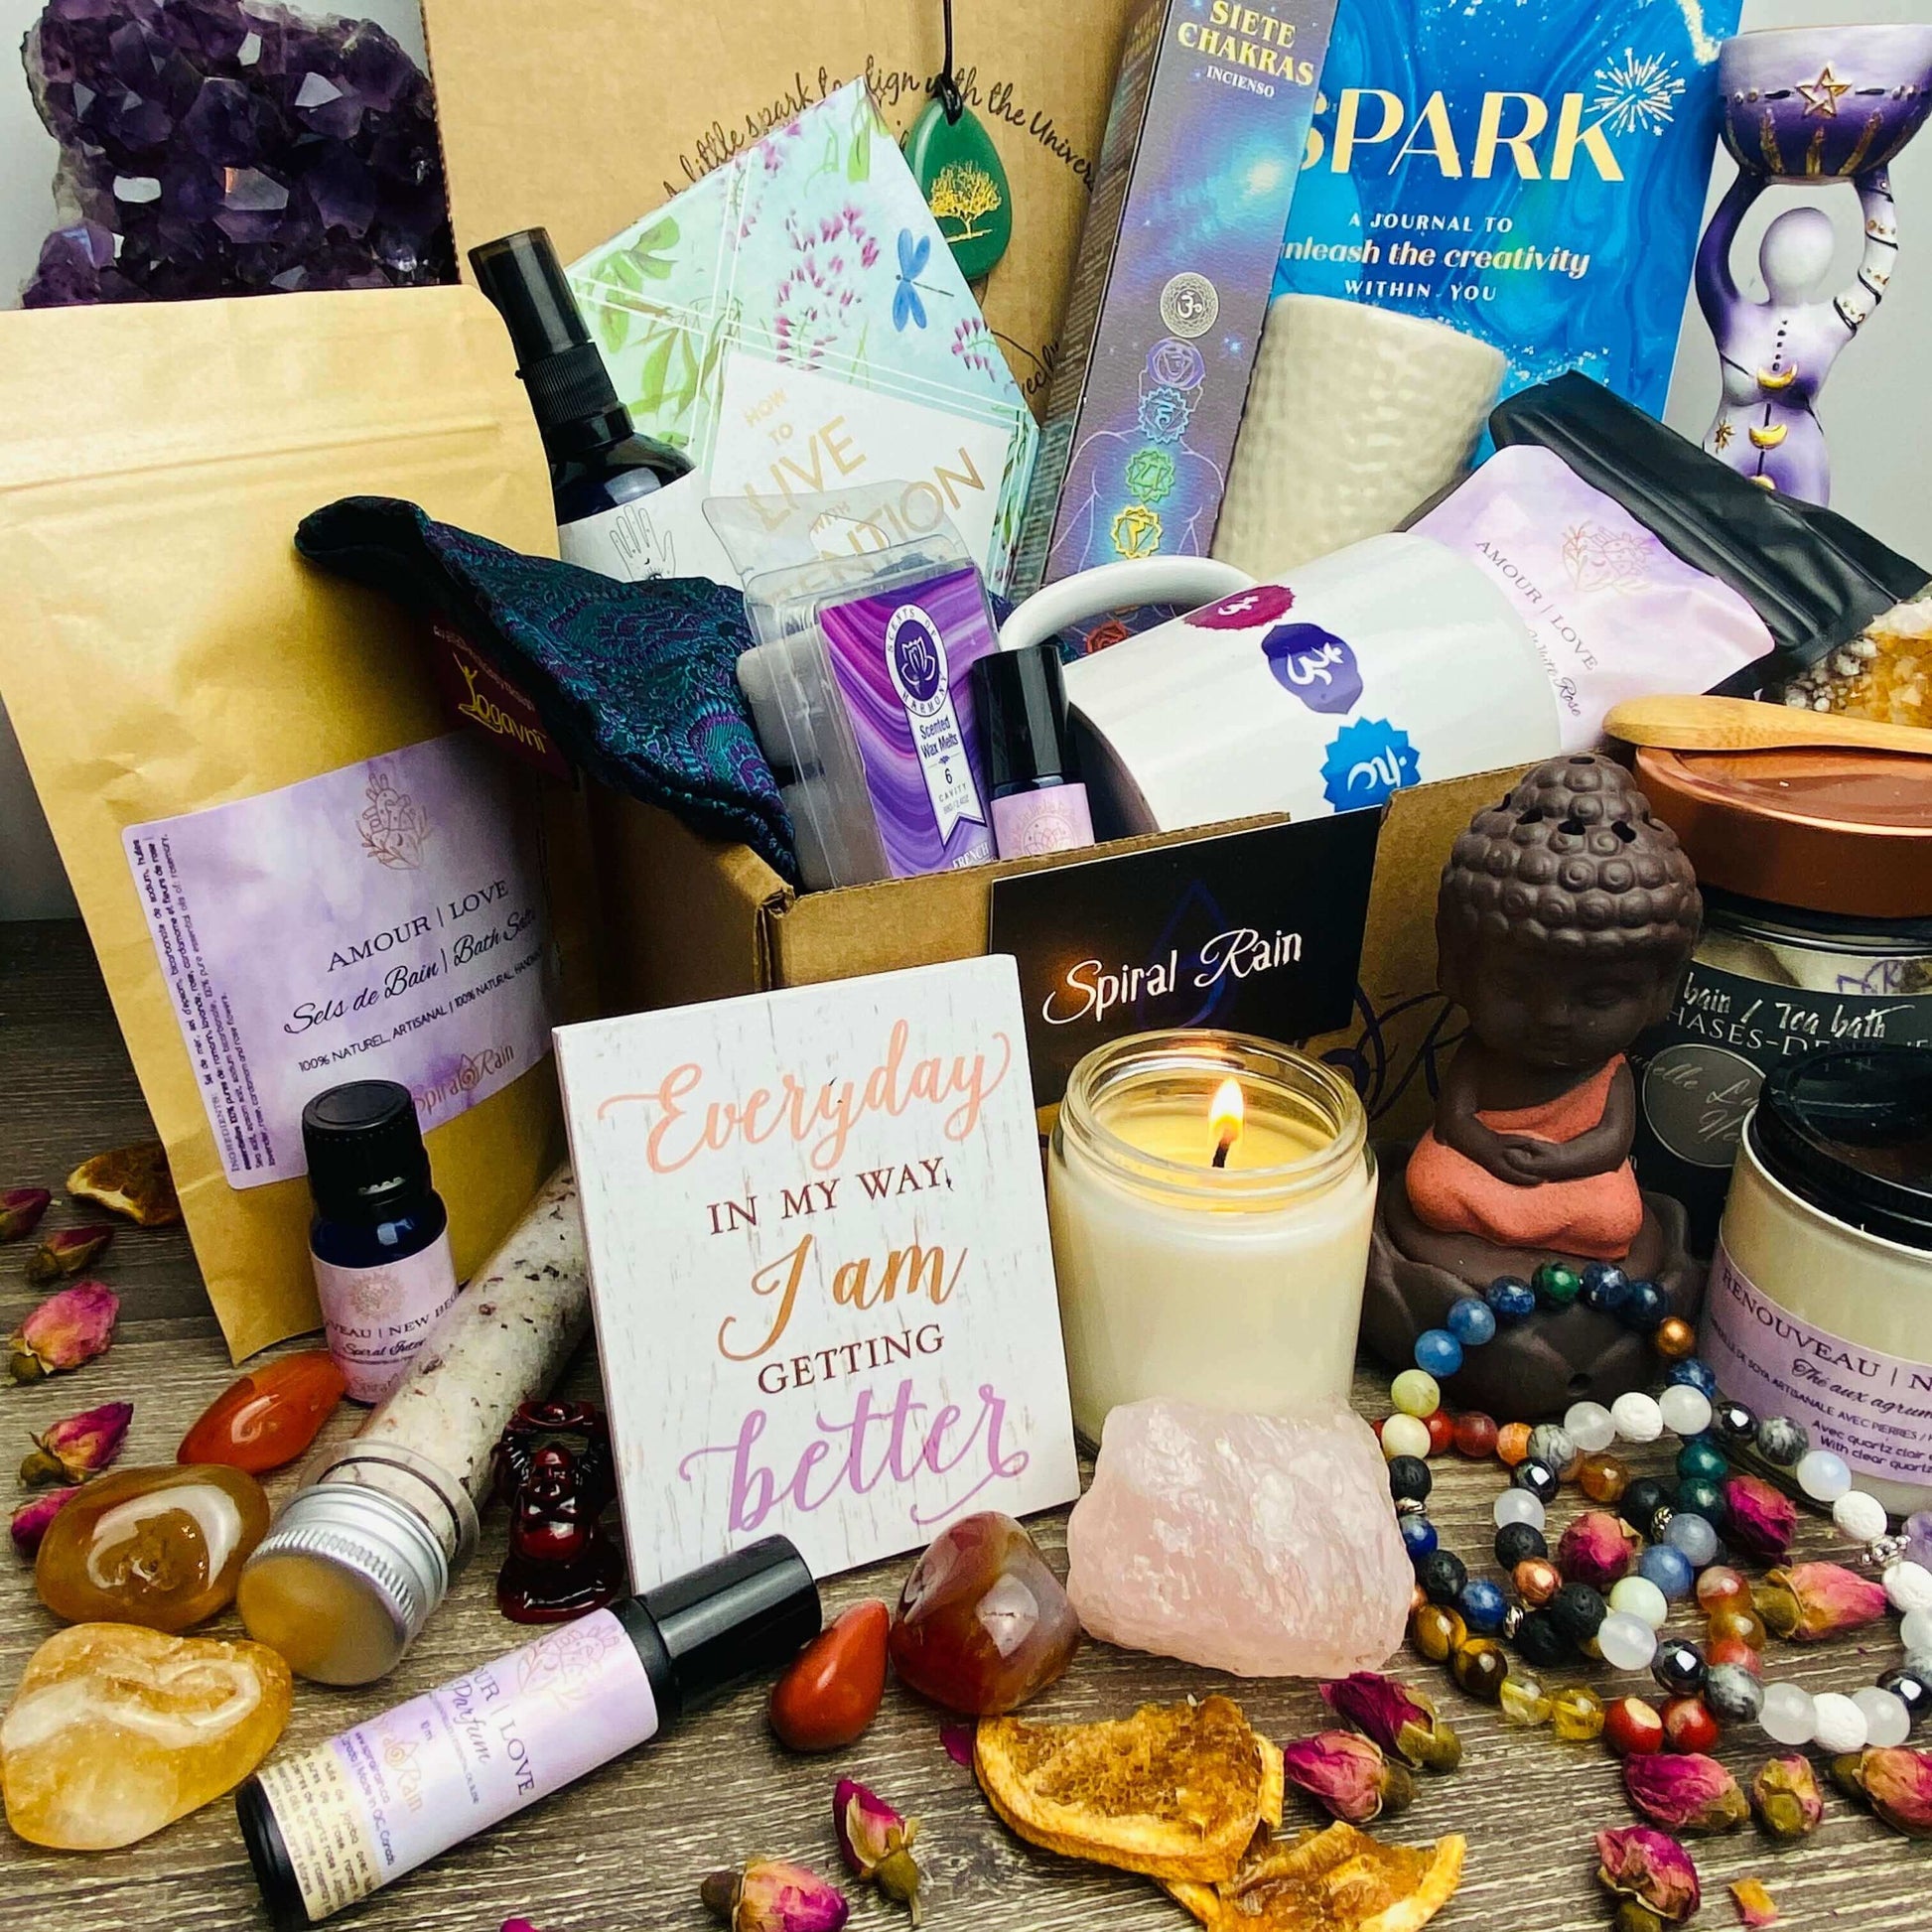 Crystals + Ohm + Witch Box combo at $110.99 only from Spiral Rain